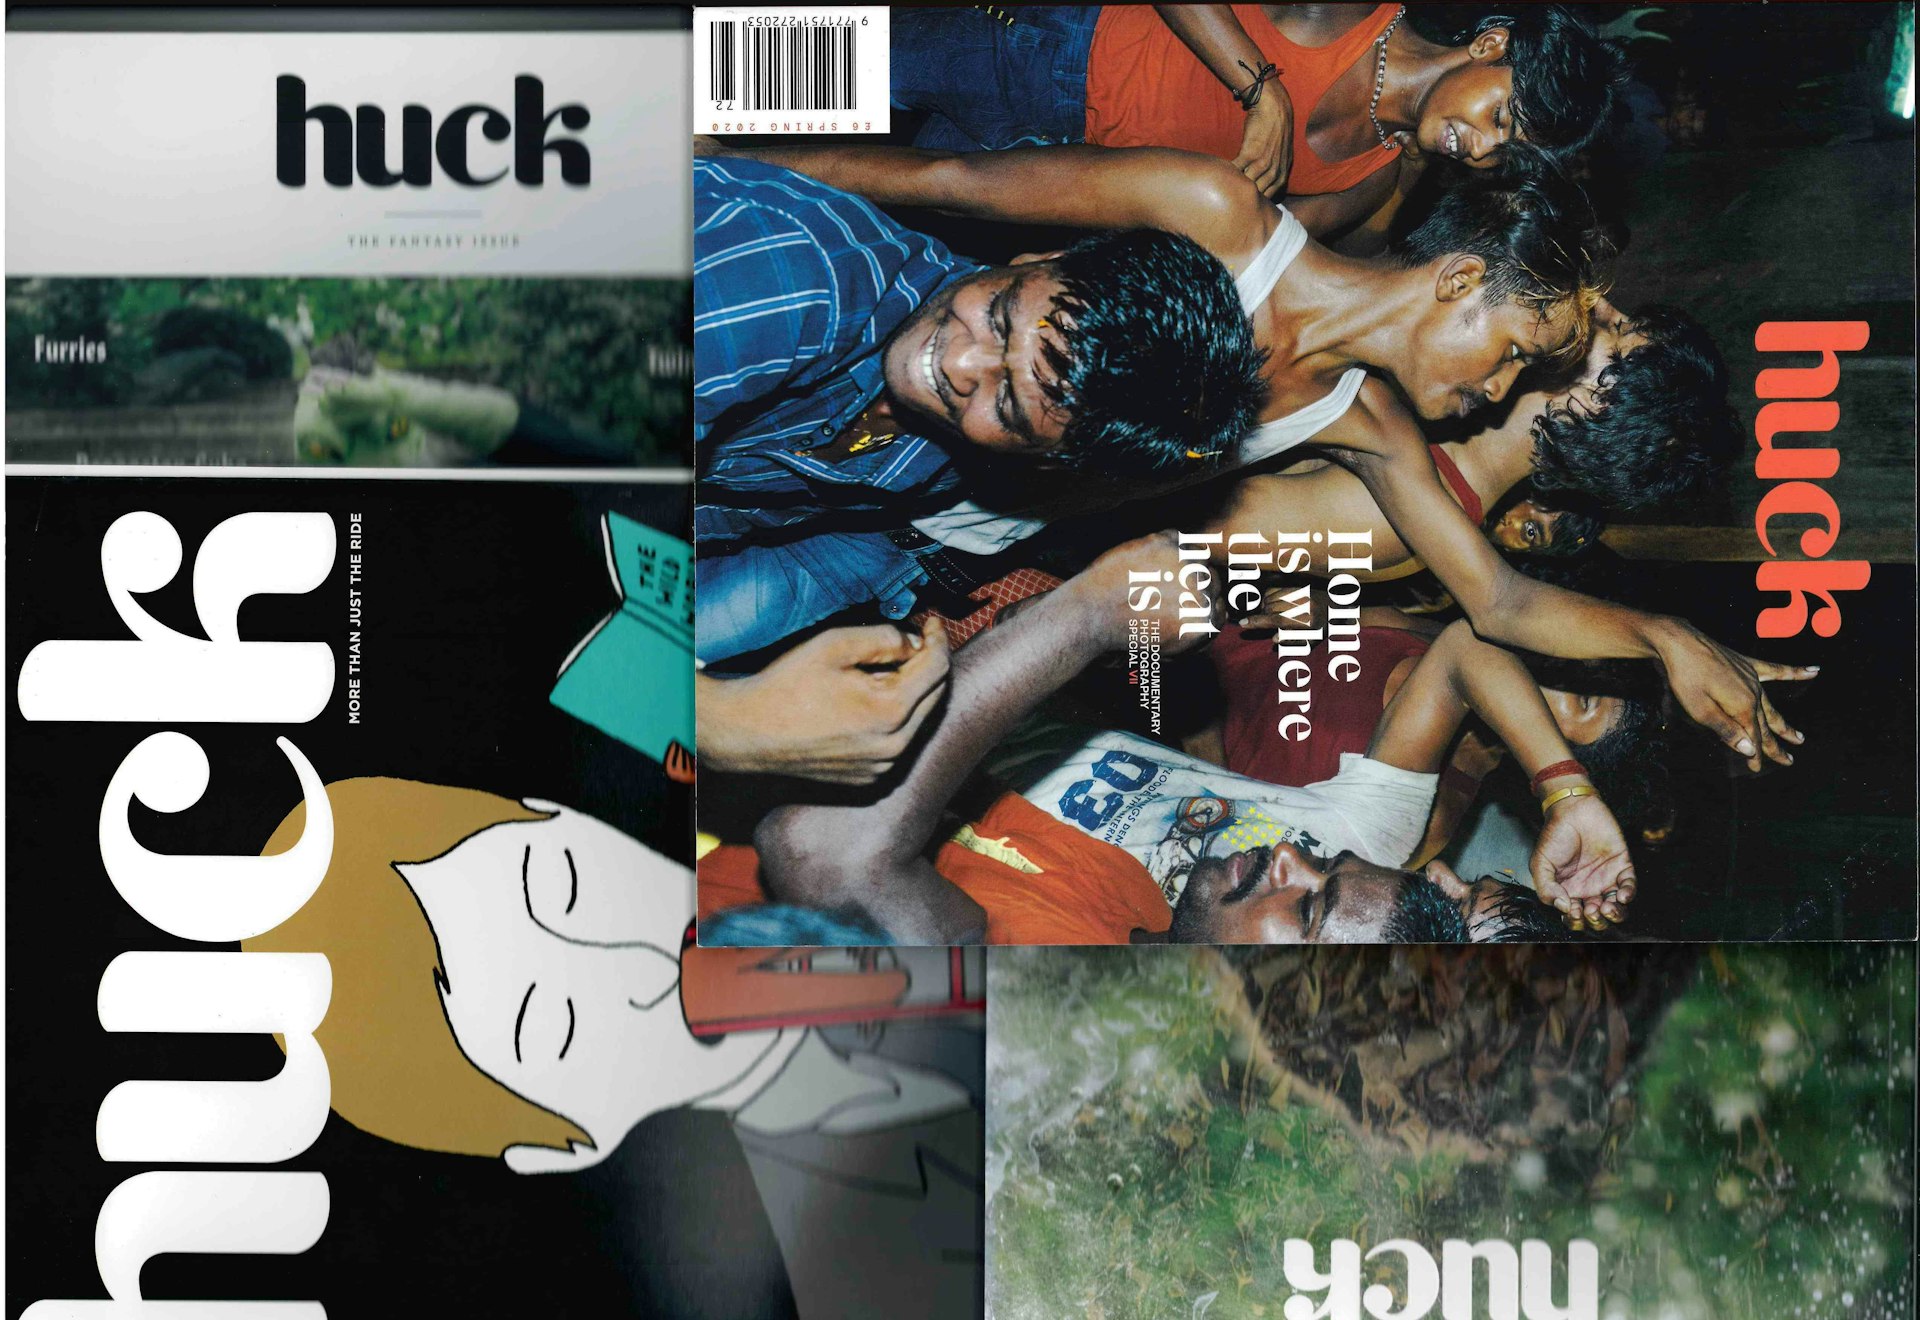 Huck 80: Our favourite covers